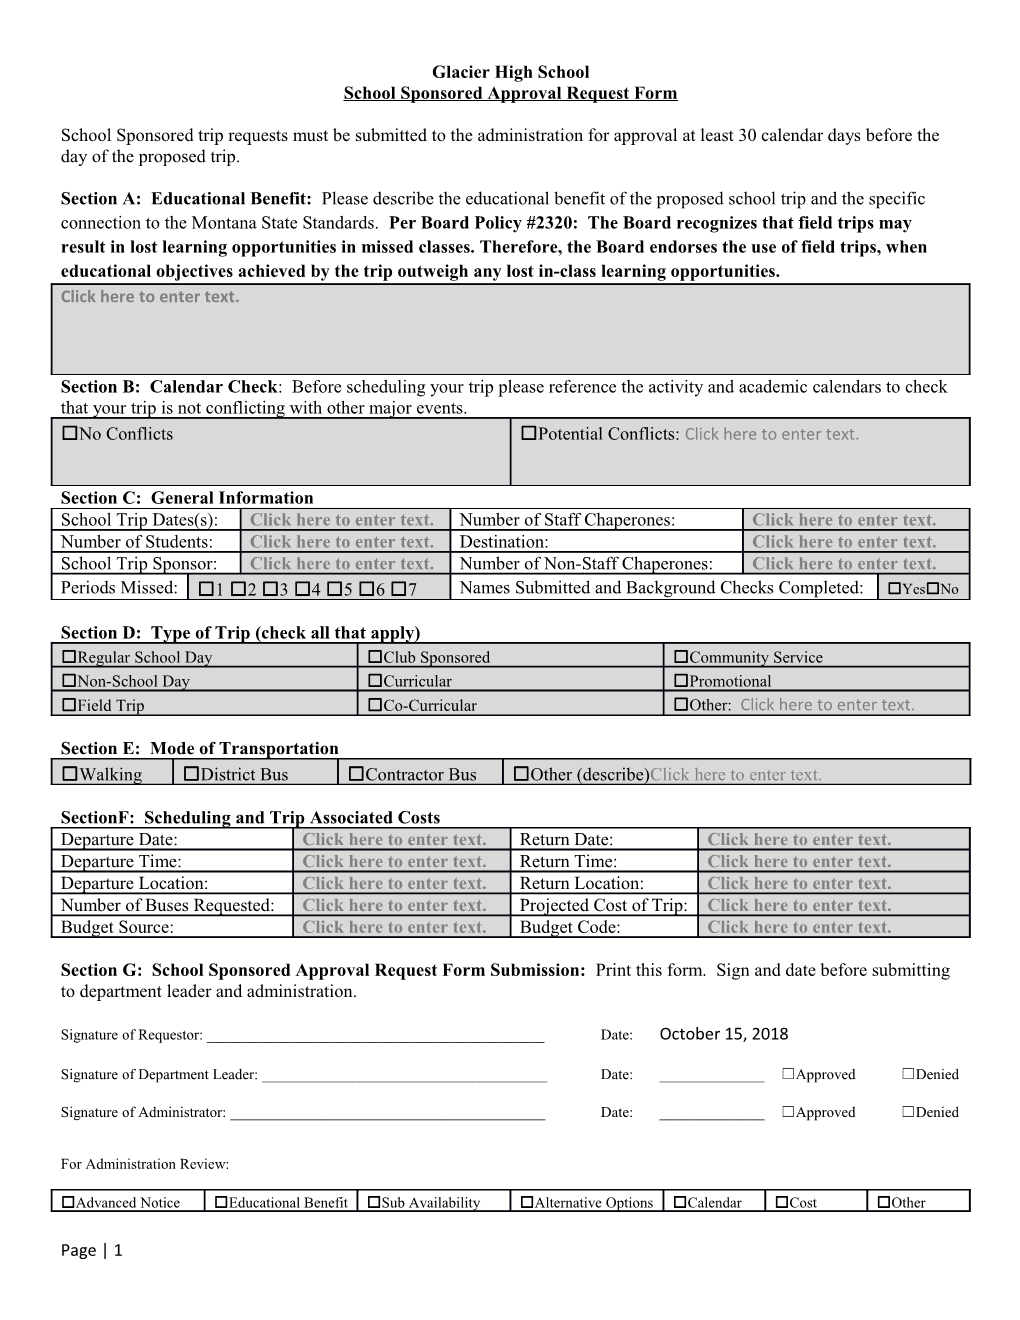 School Sponsored Approval Request Form